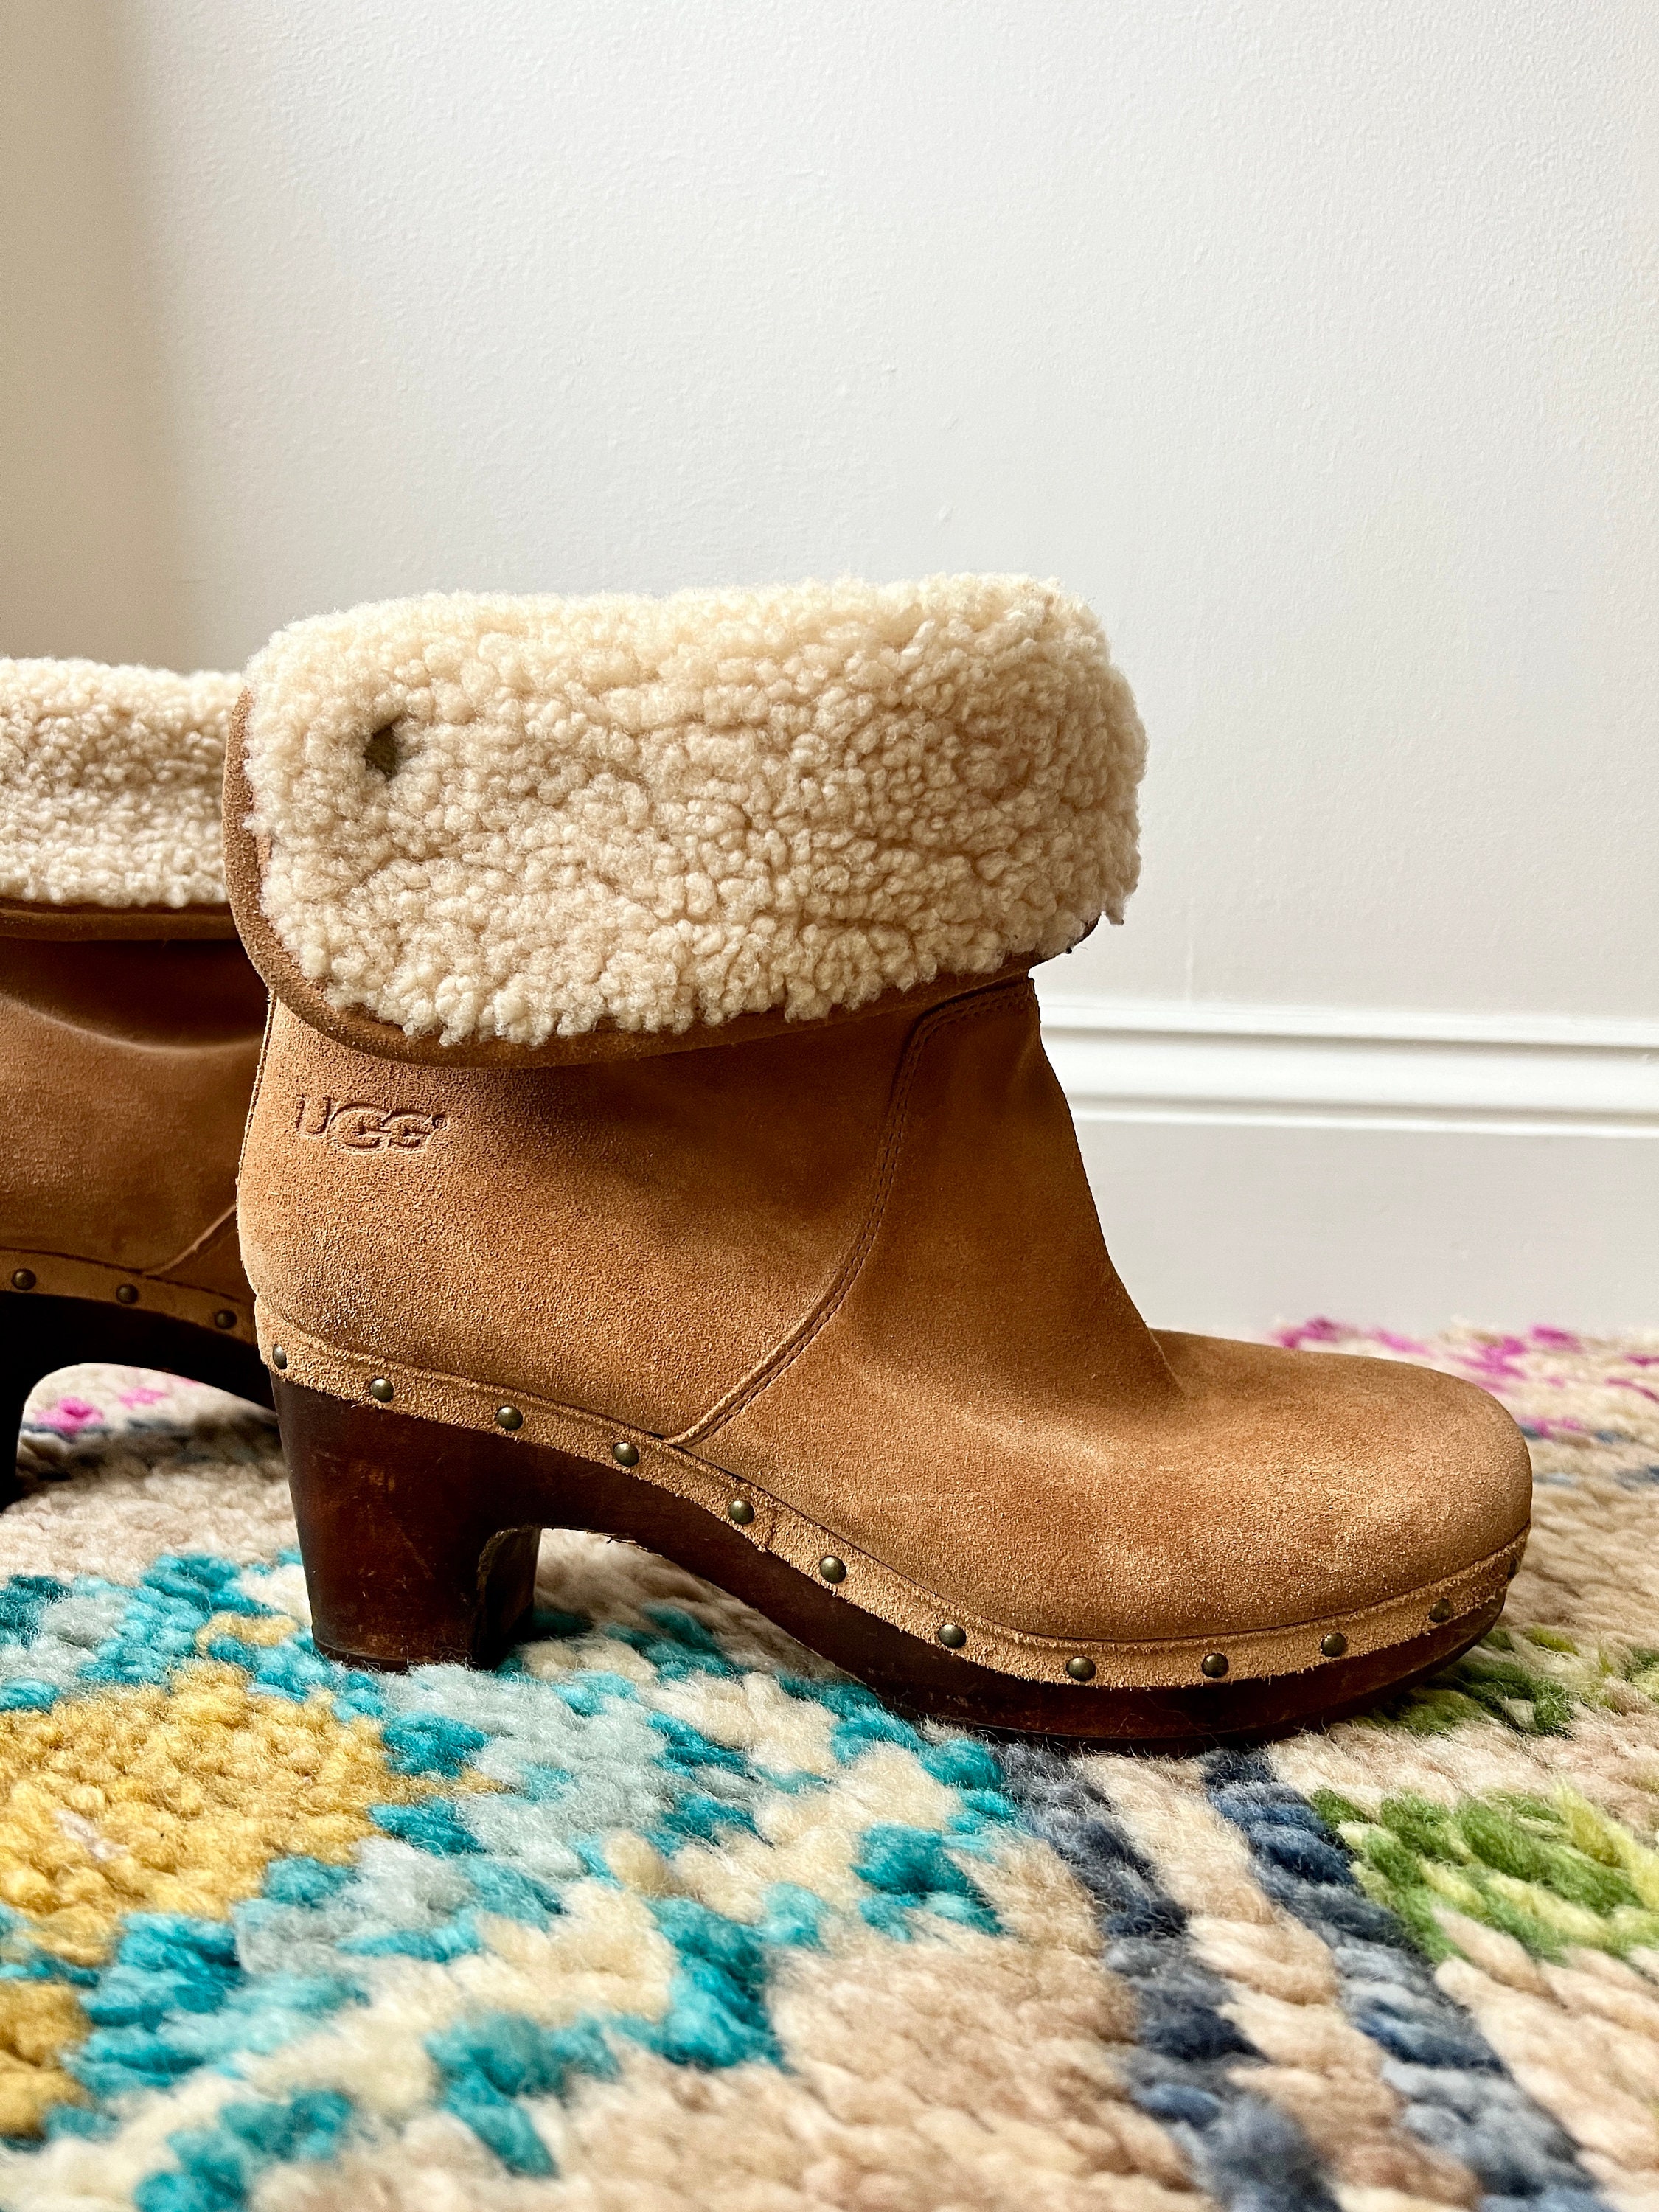 Ugg Shearling Clog Suede Booties Size 9 Tan Wood Bottom Clog - Etsy Israel